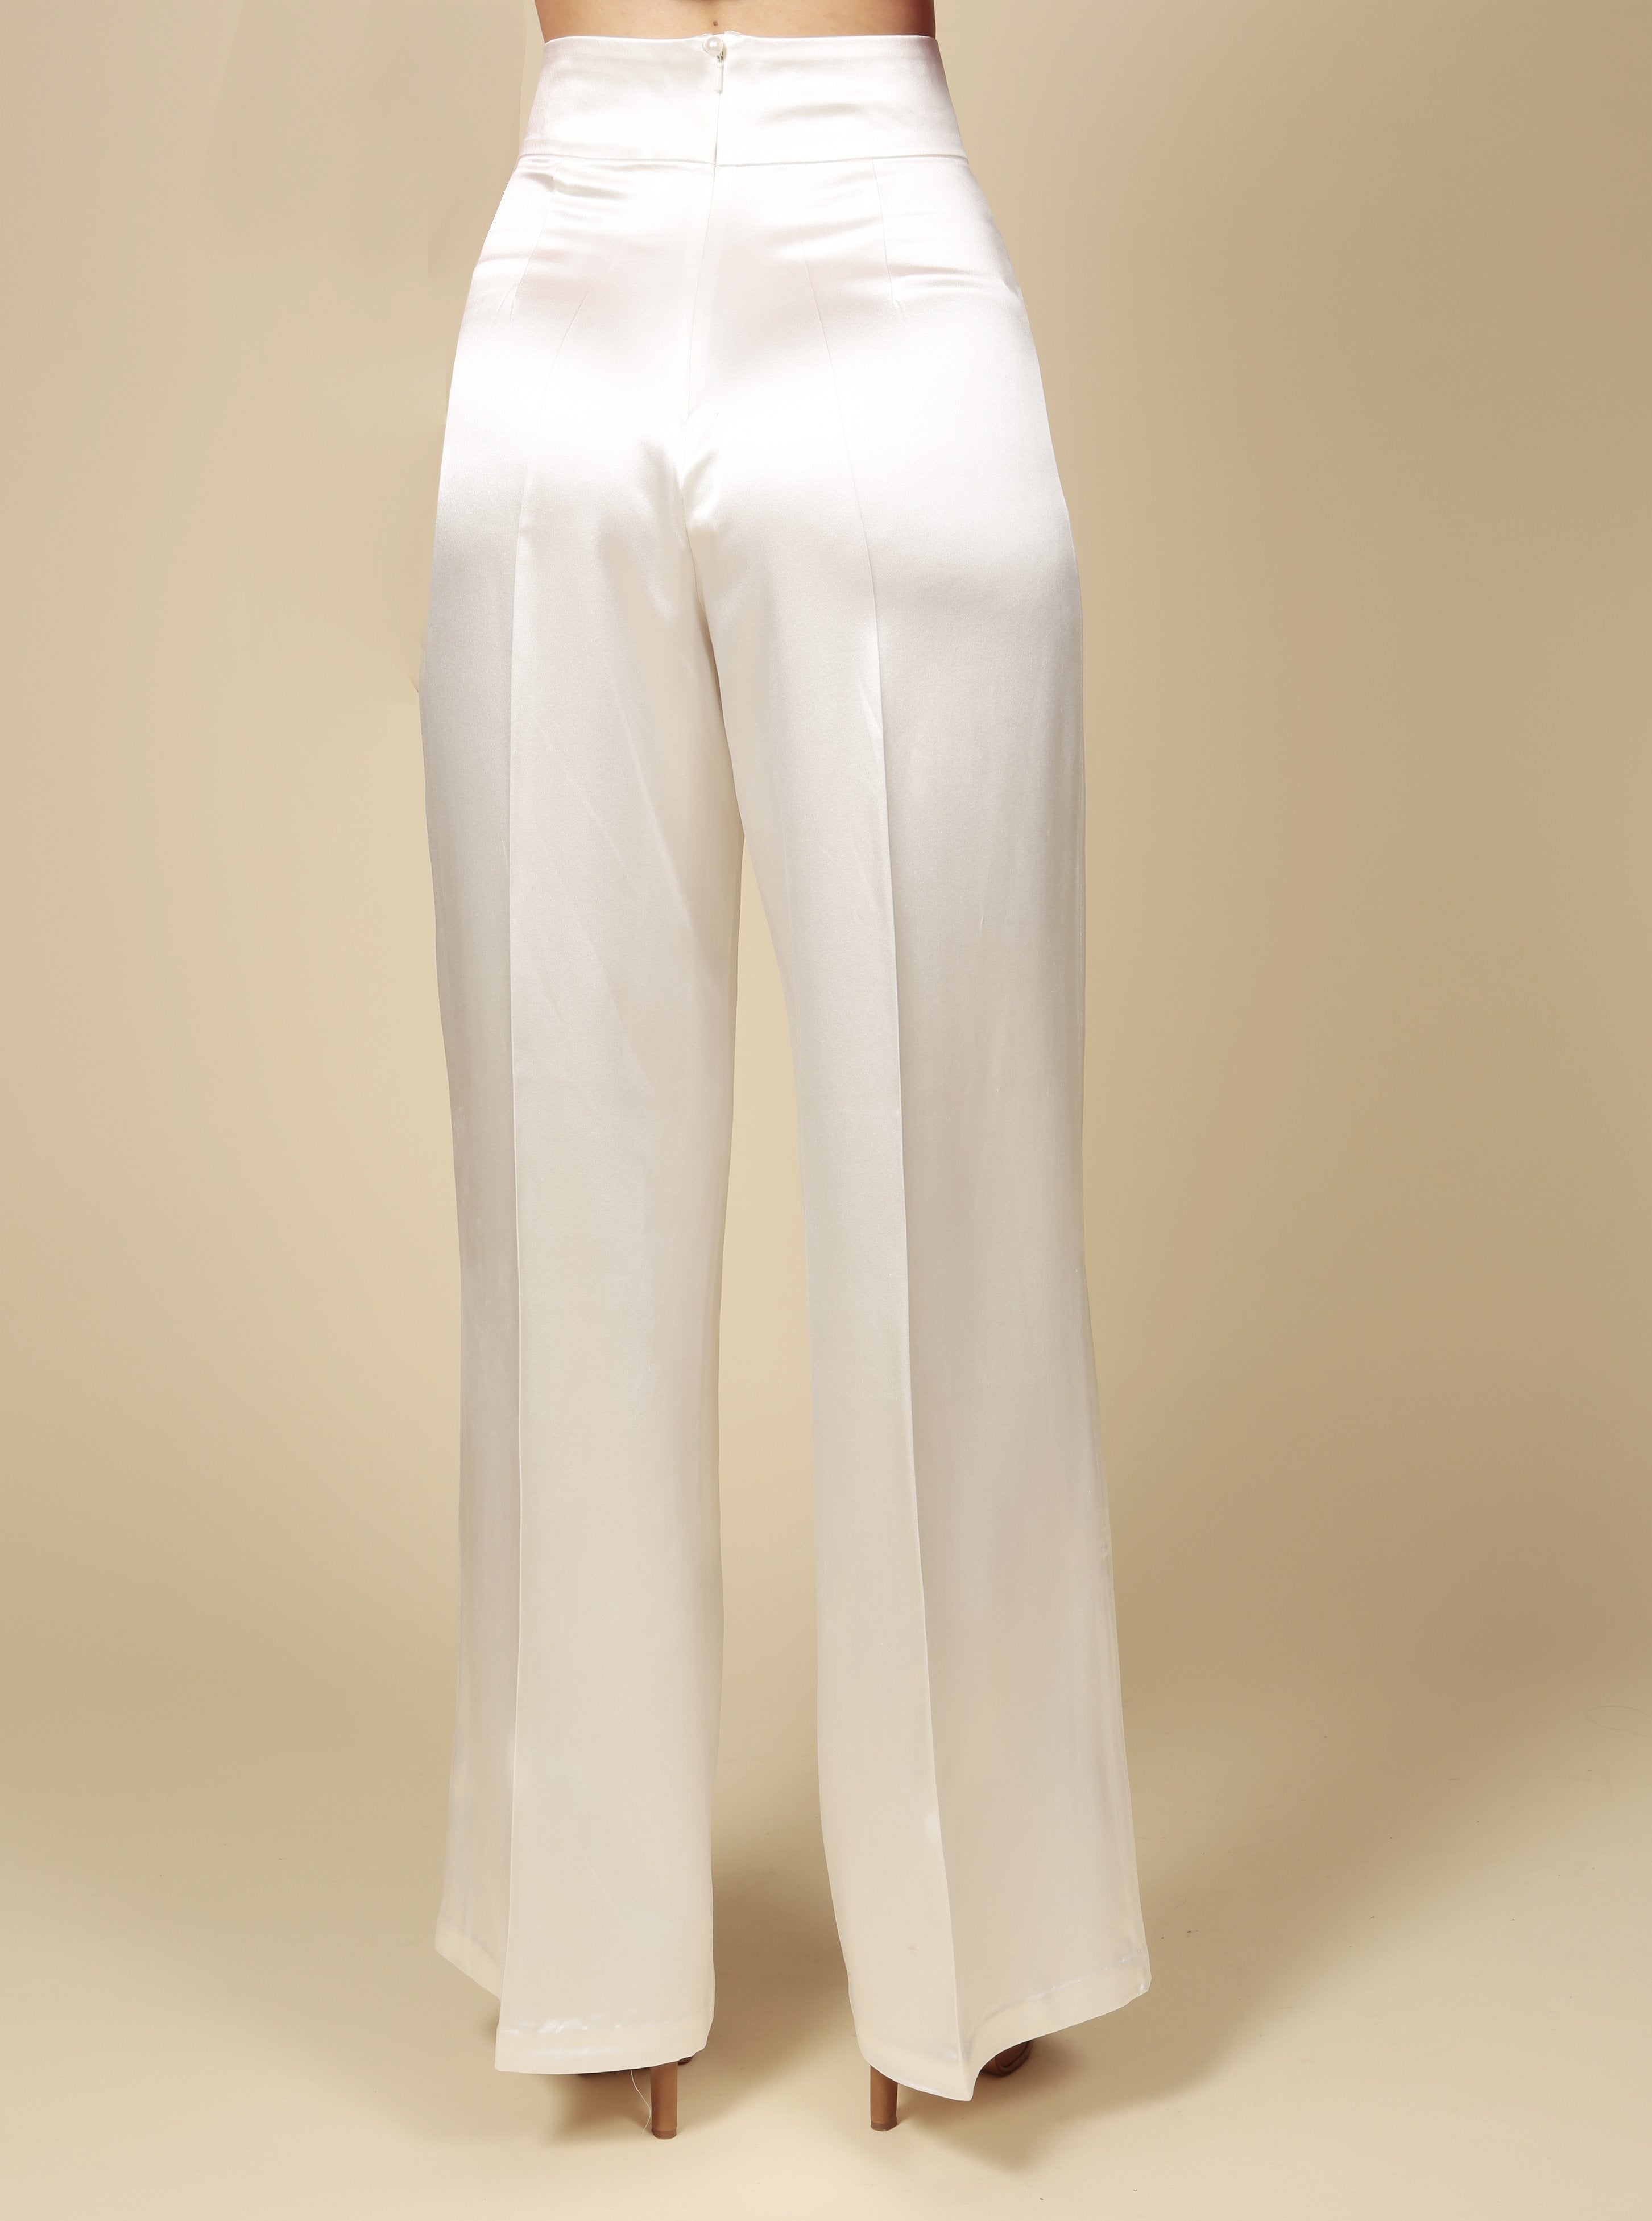 LIMITED EDITION 'Jolie' Heavy Silk Palazzo Trousers in Bianco